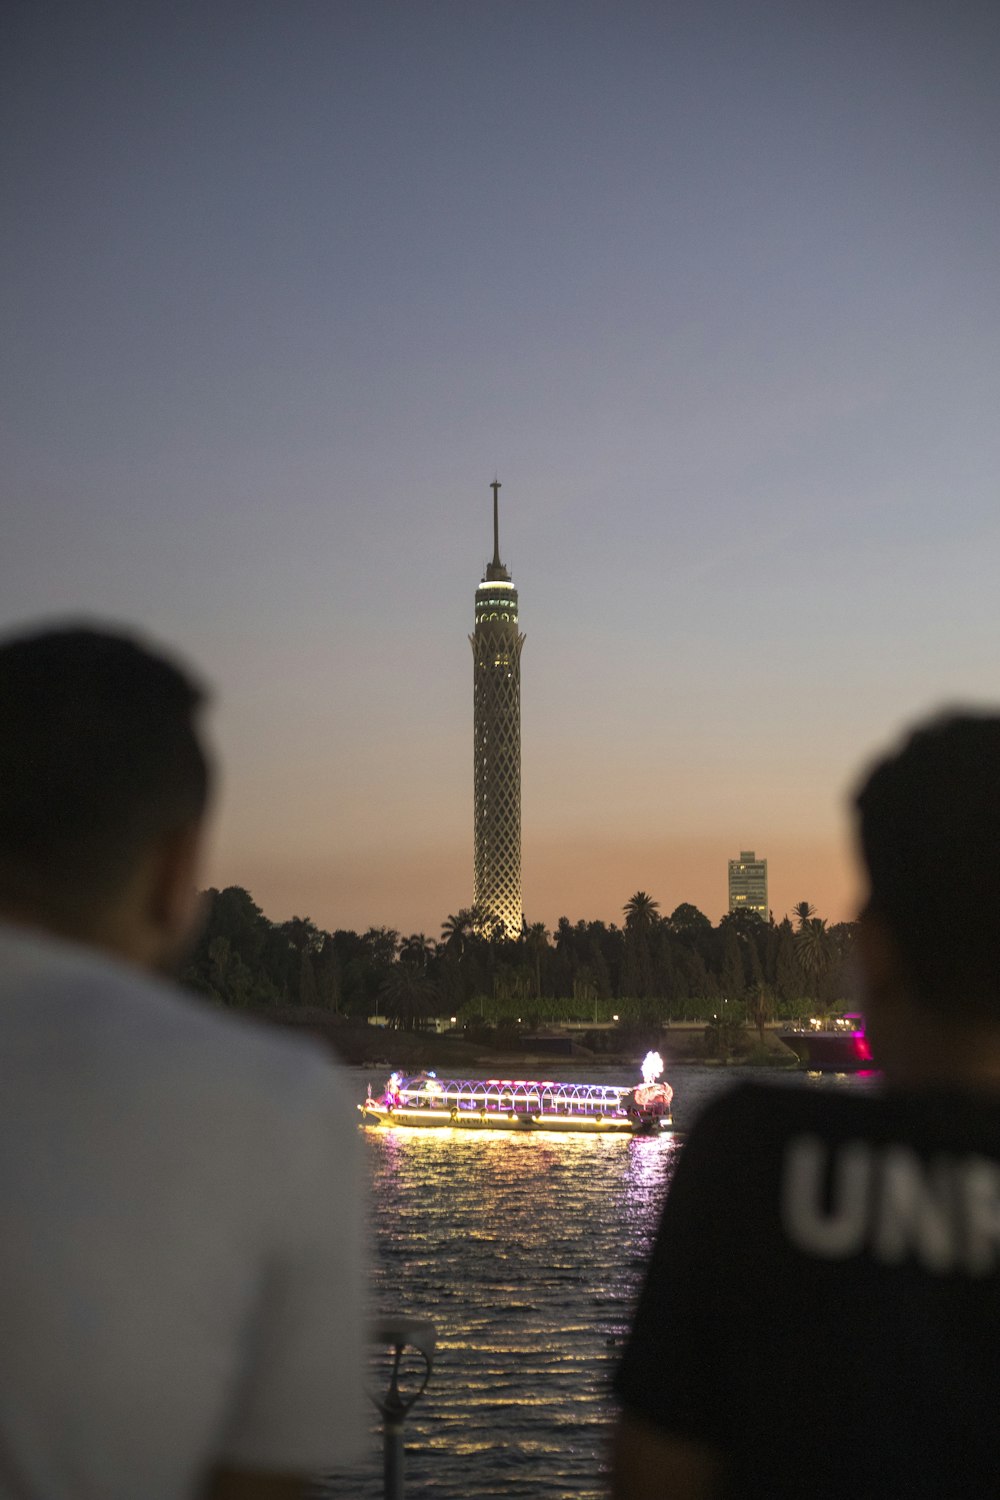 a group of people on a boat in front of a tall tower